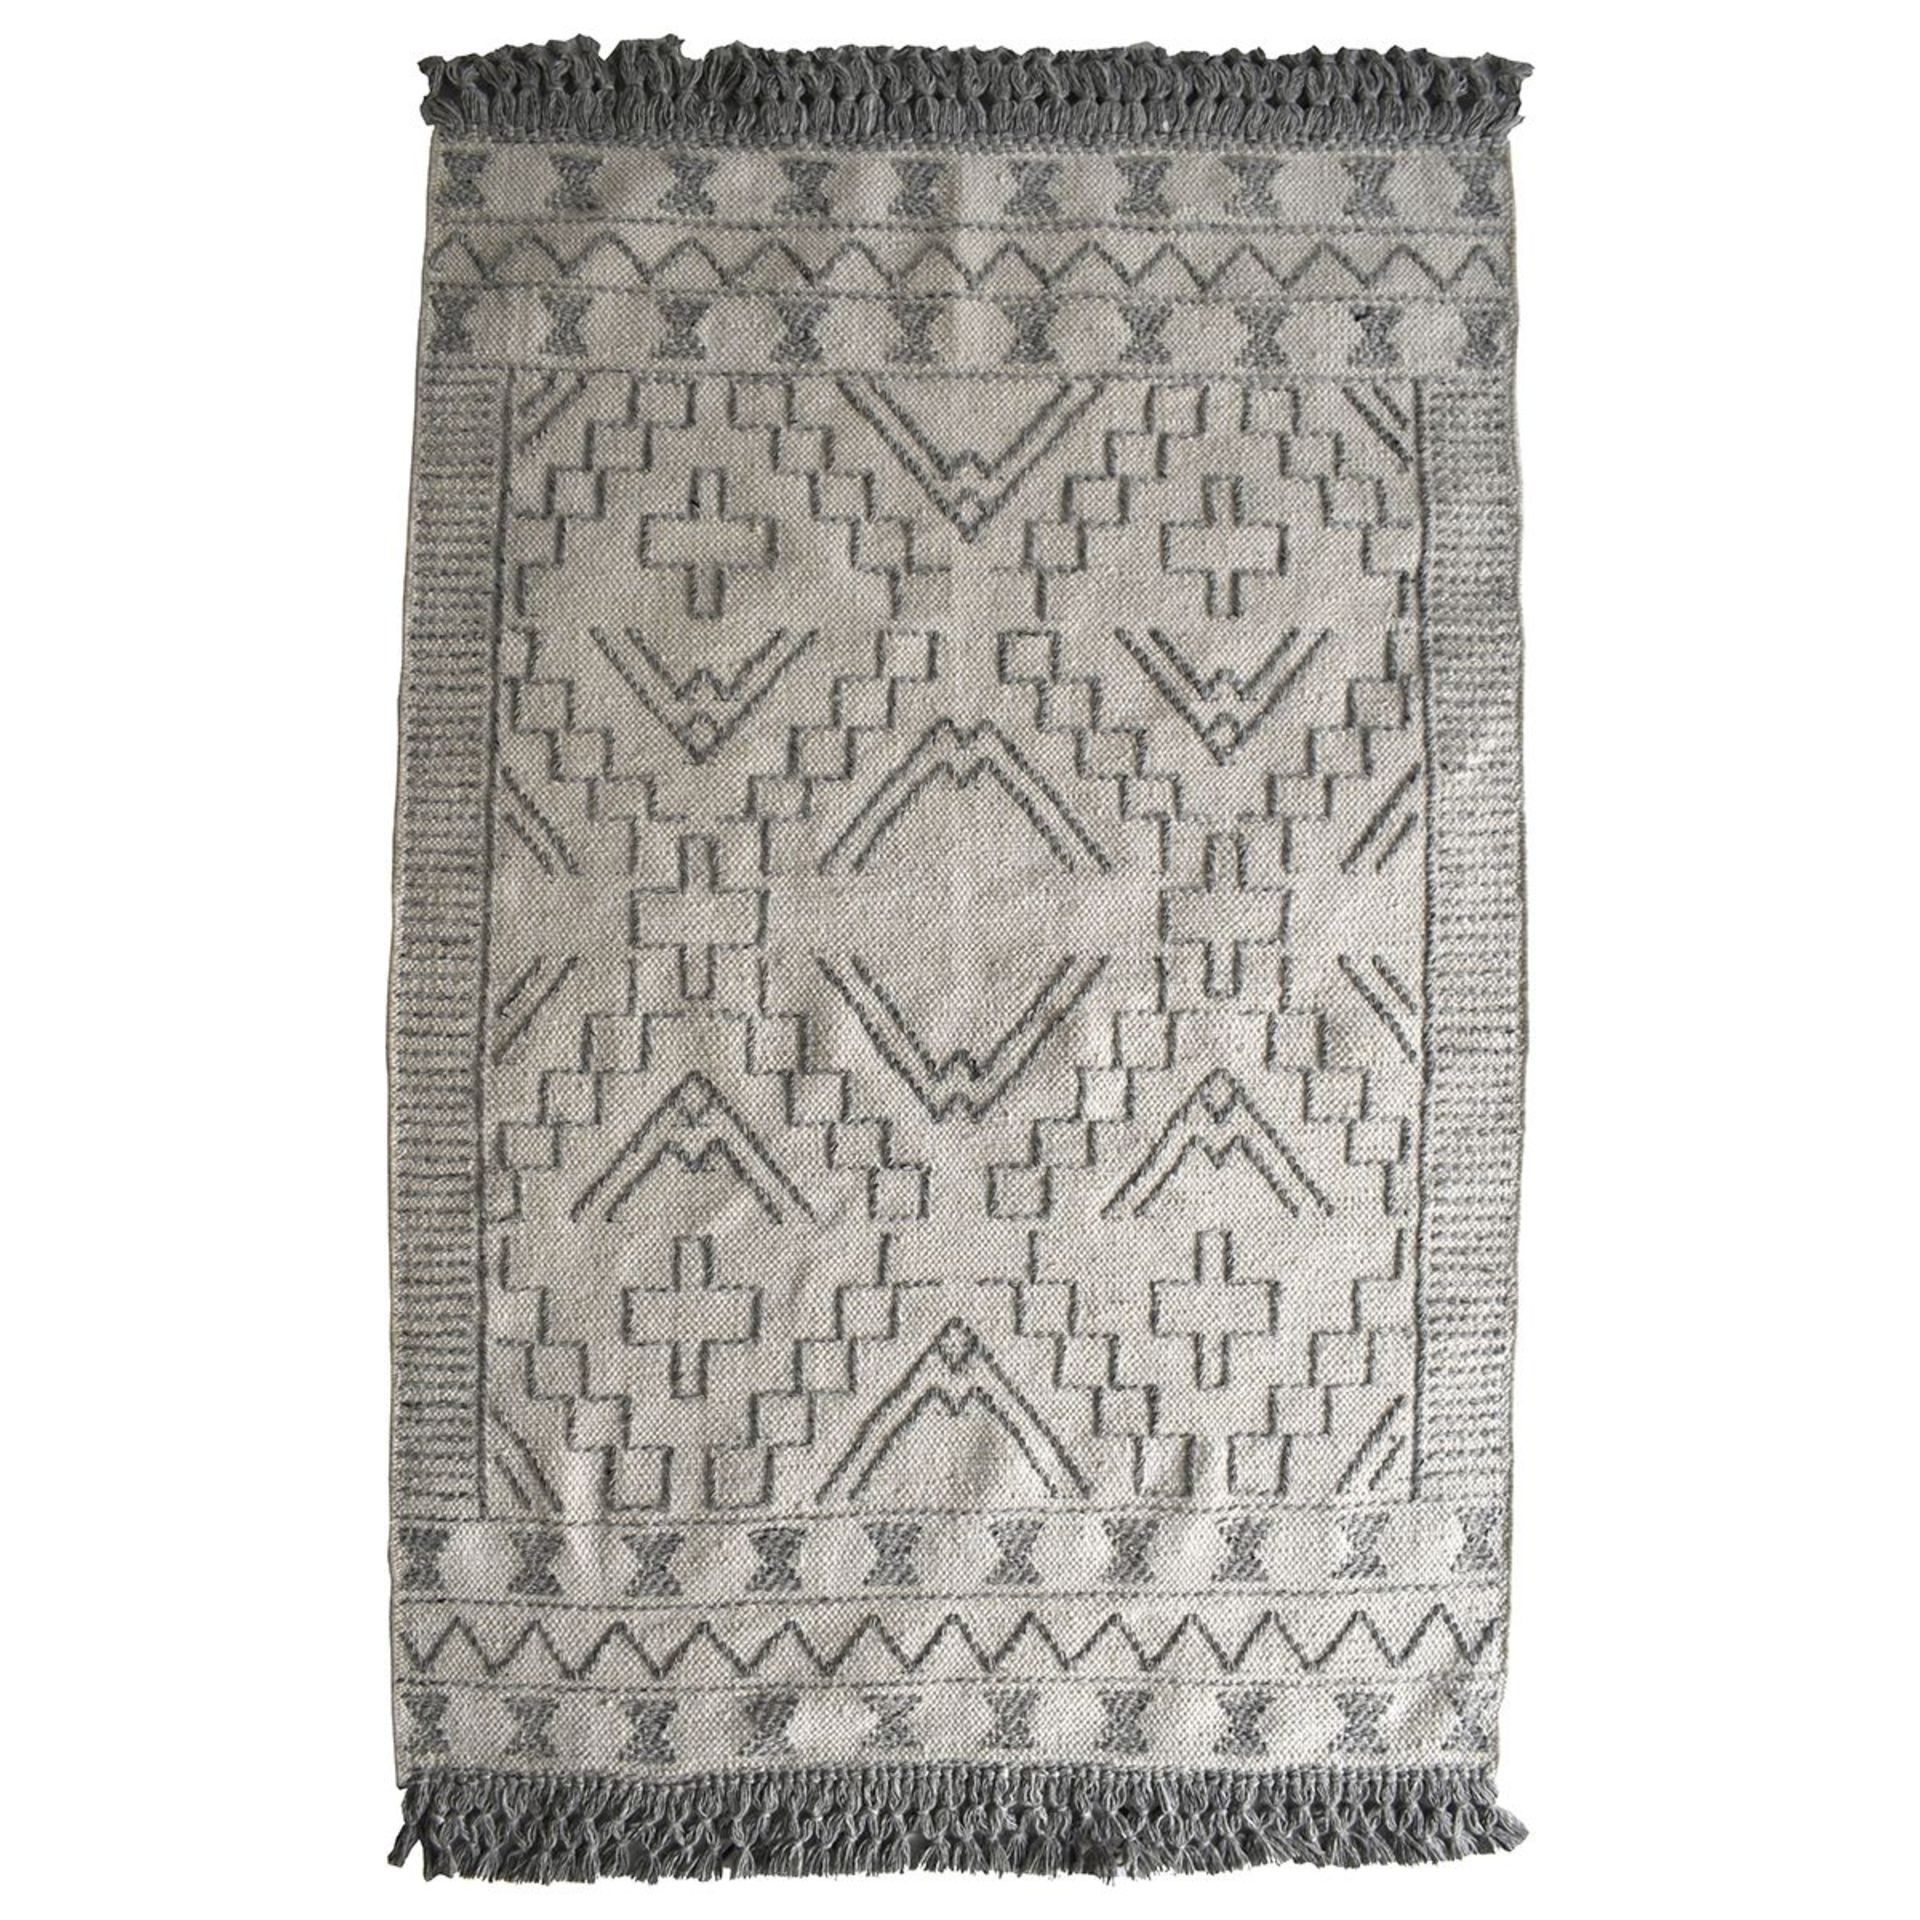 Peru Area Rug Ivory 120 x 170cm This Light Weight, Cream And Grey Aztec Inspired Rug Is The Ideal - Image 3 of 3